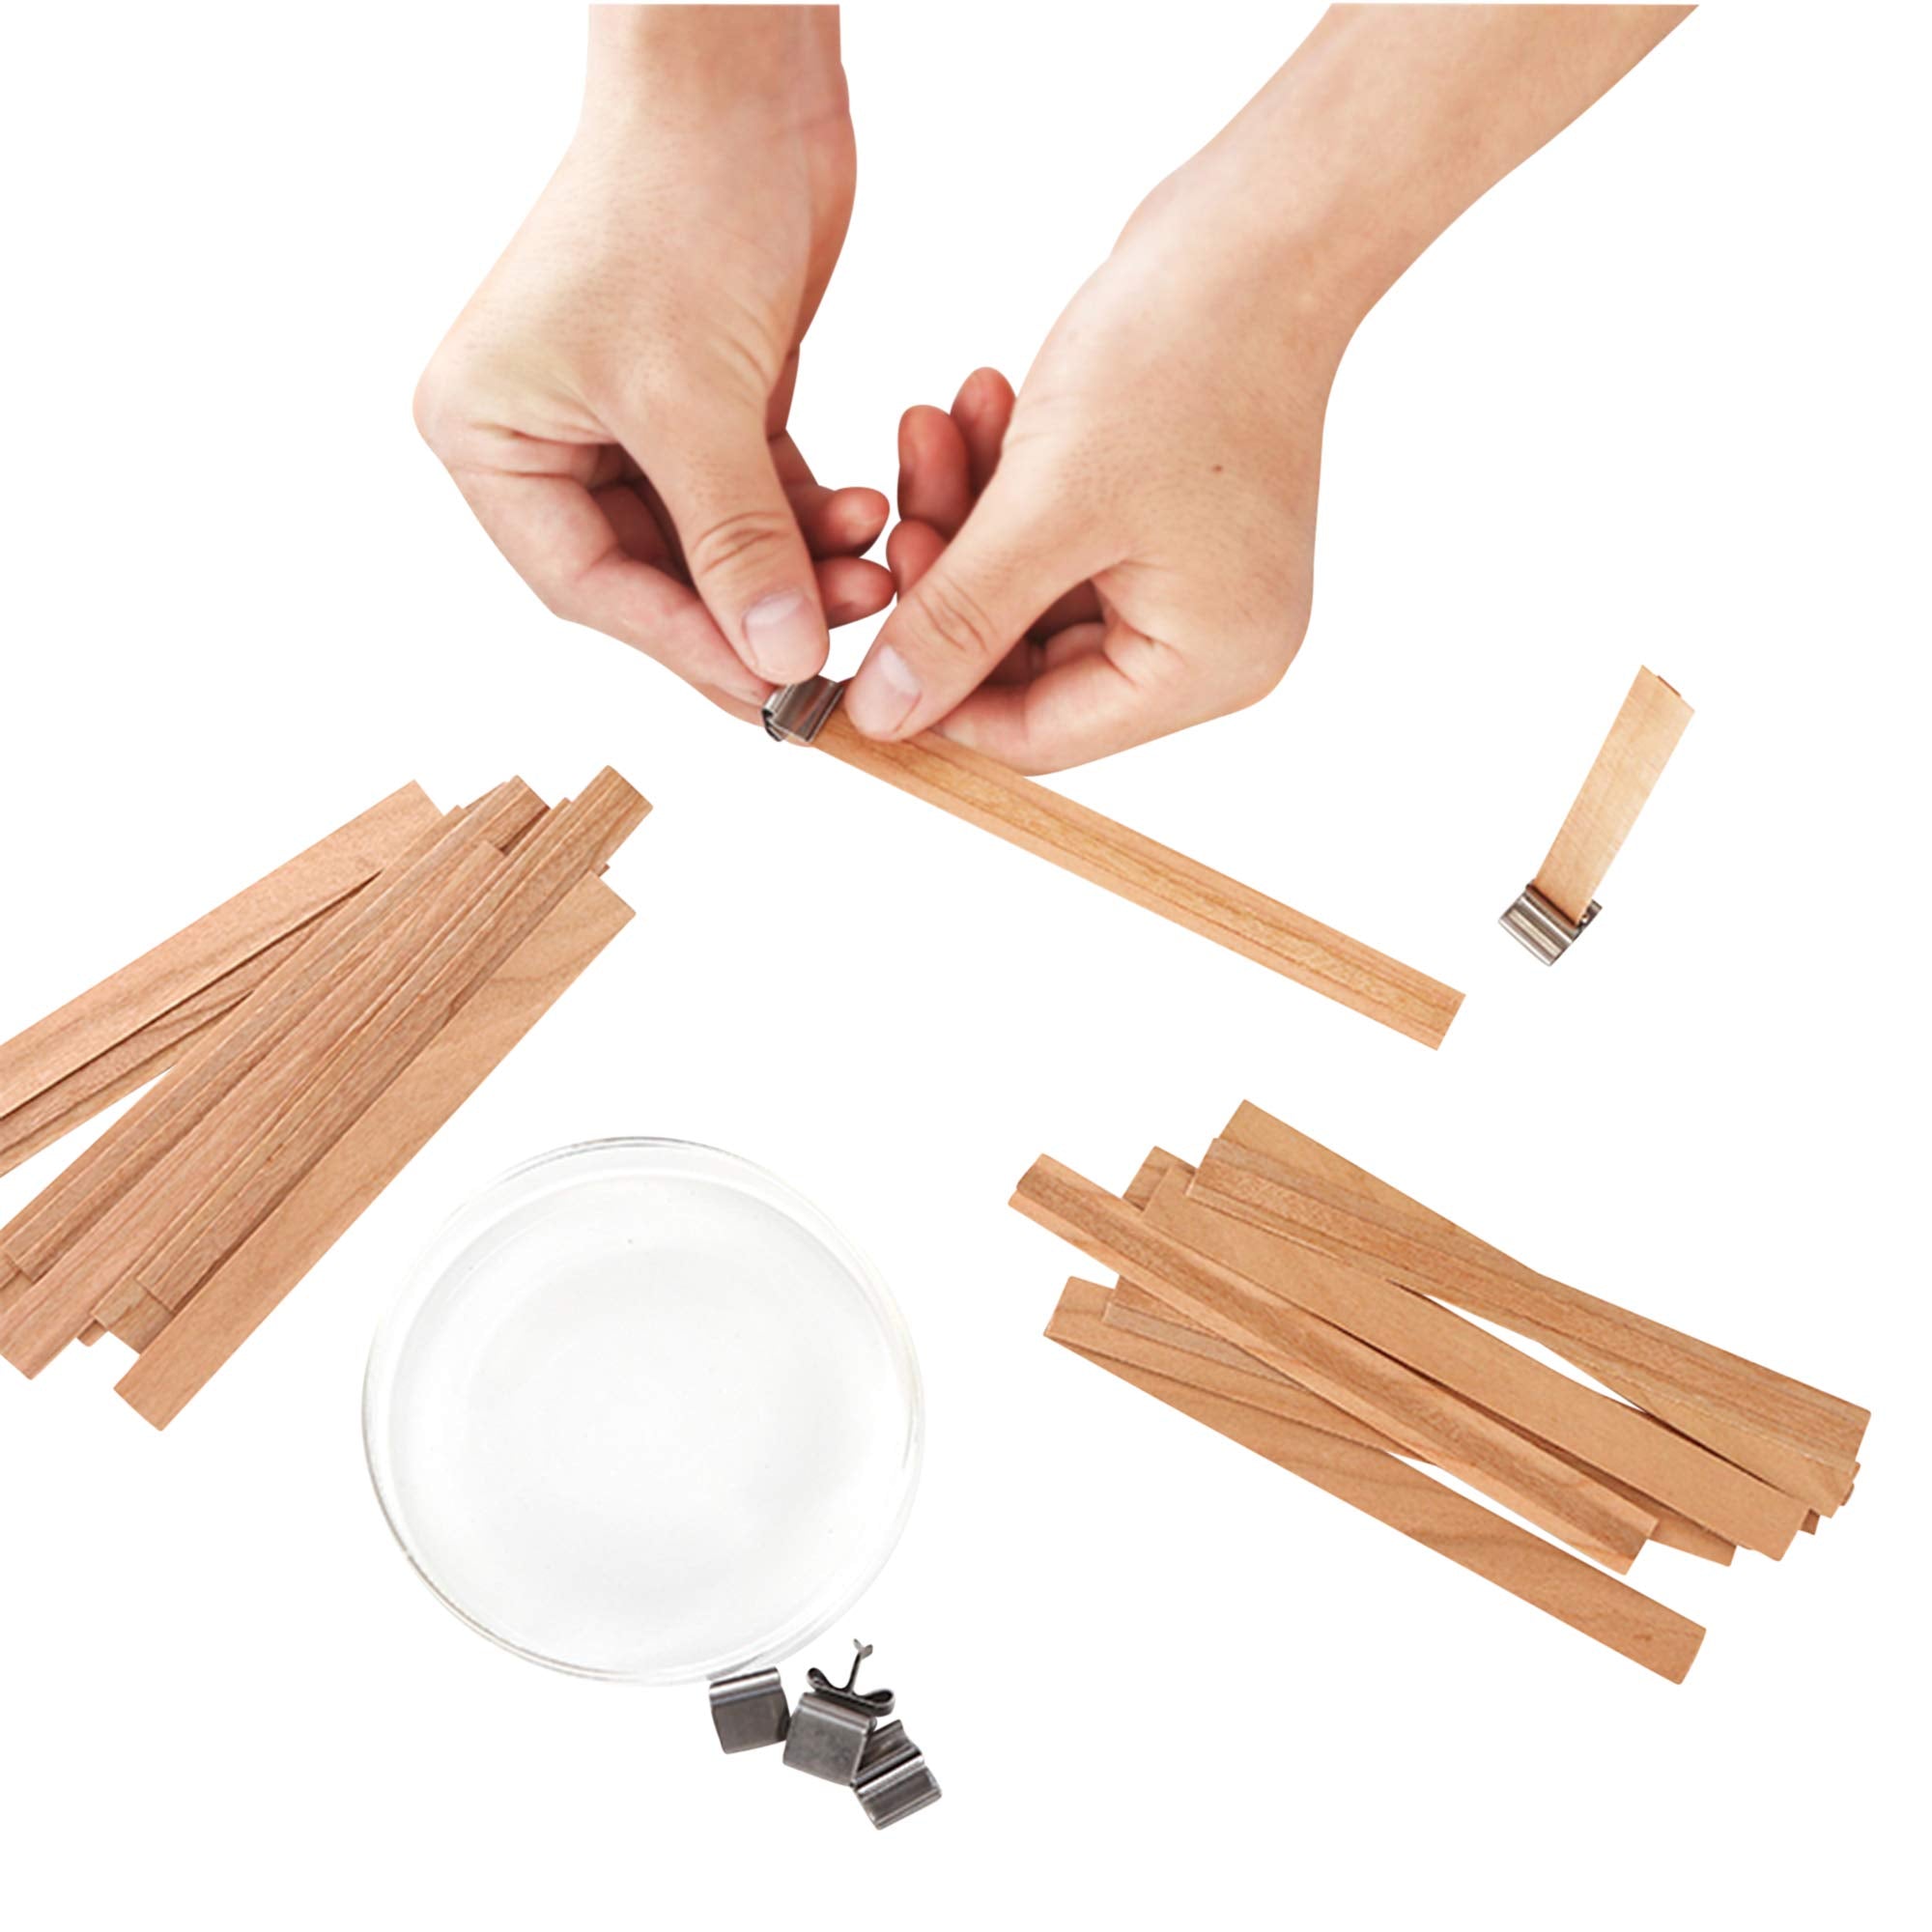 50 Pcs Double Layered Crackling Wooden Candle Wicks with Trimmer